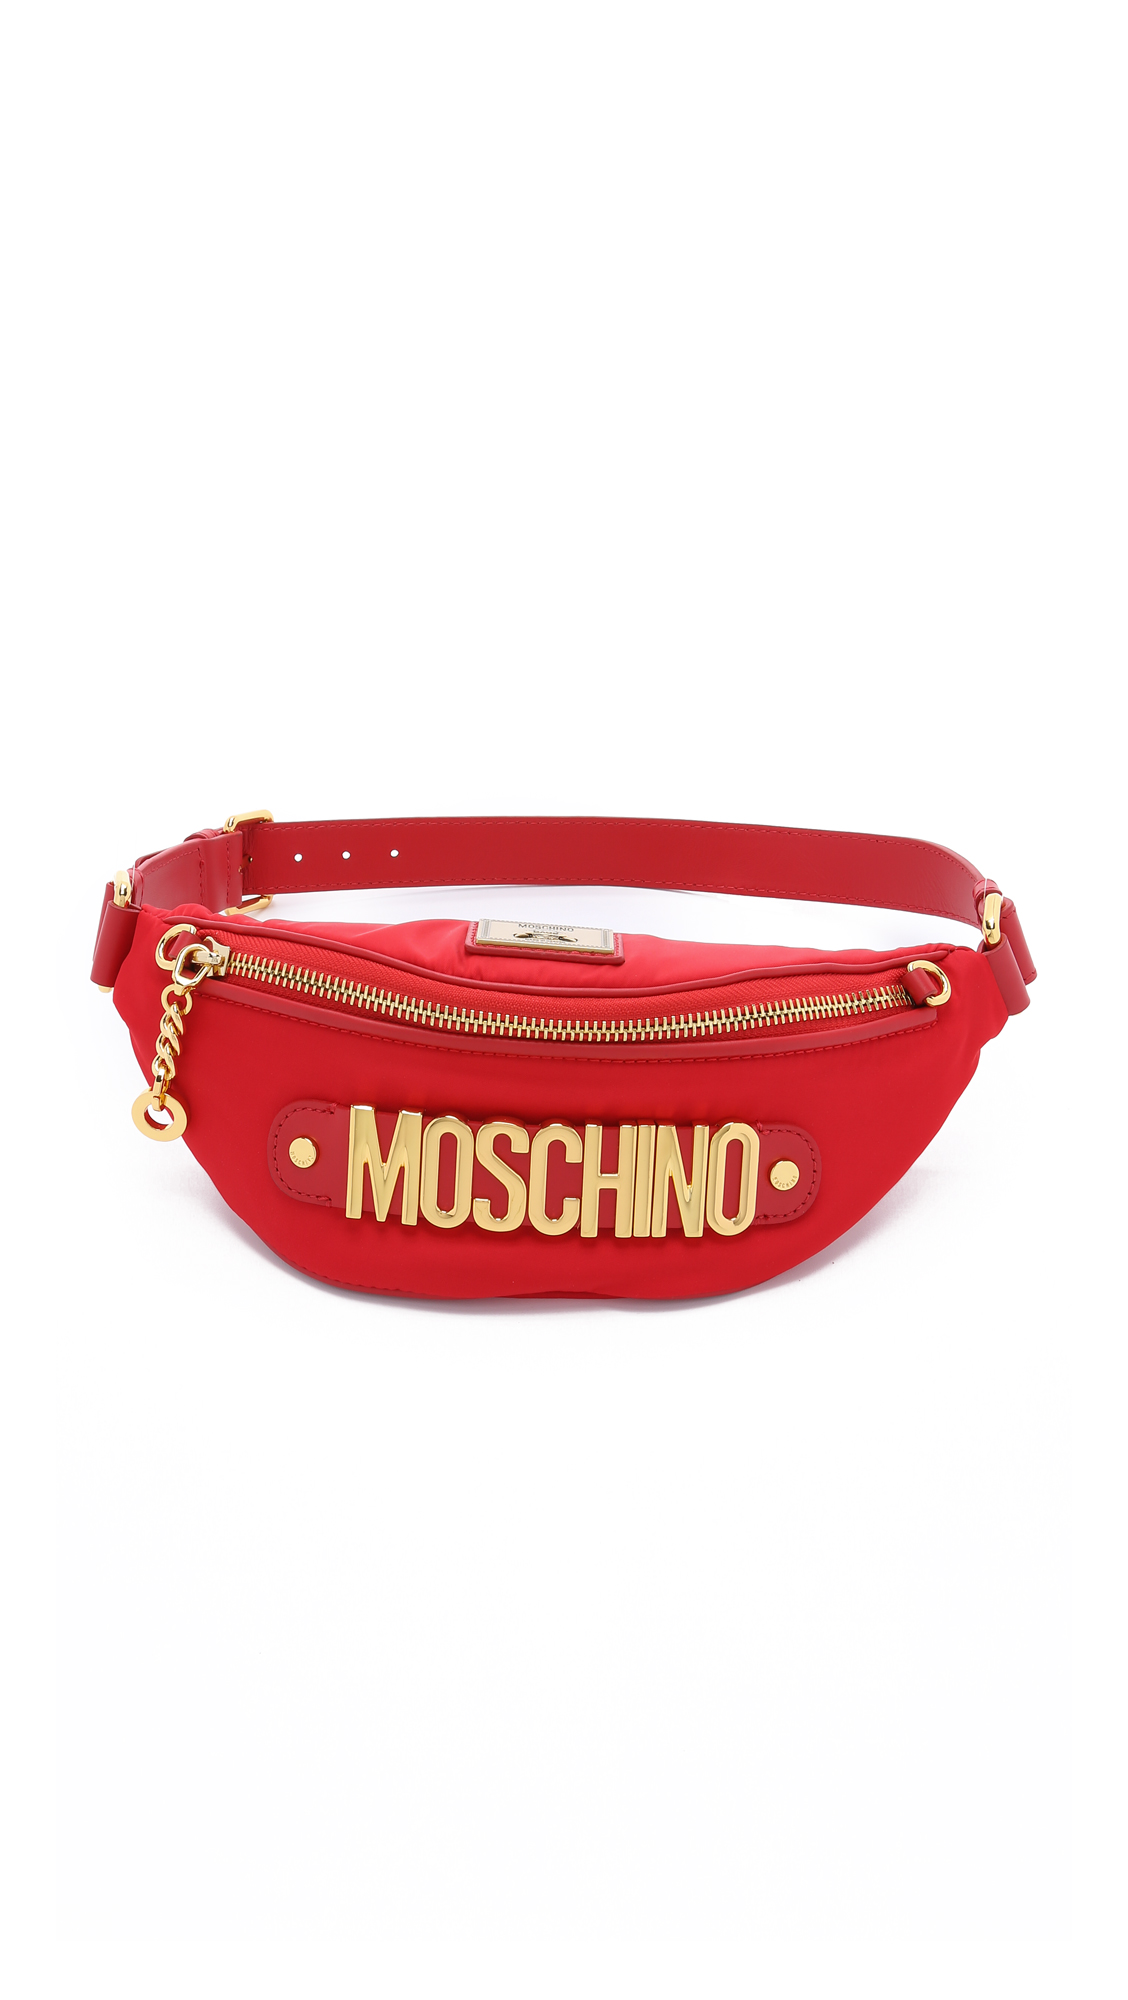 Moschino Fanny Pack In Red | ModeSens